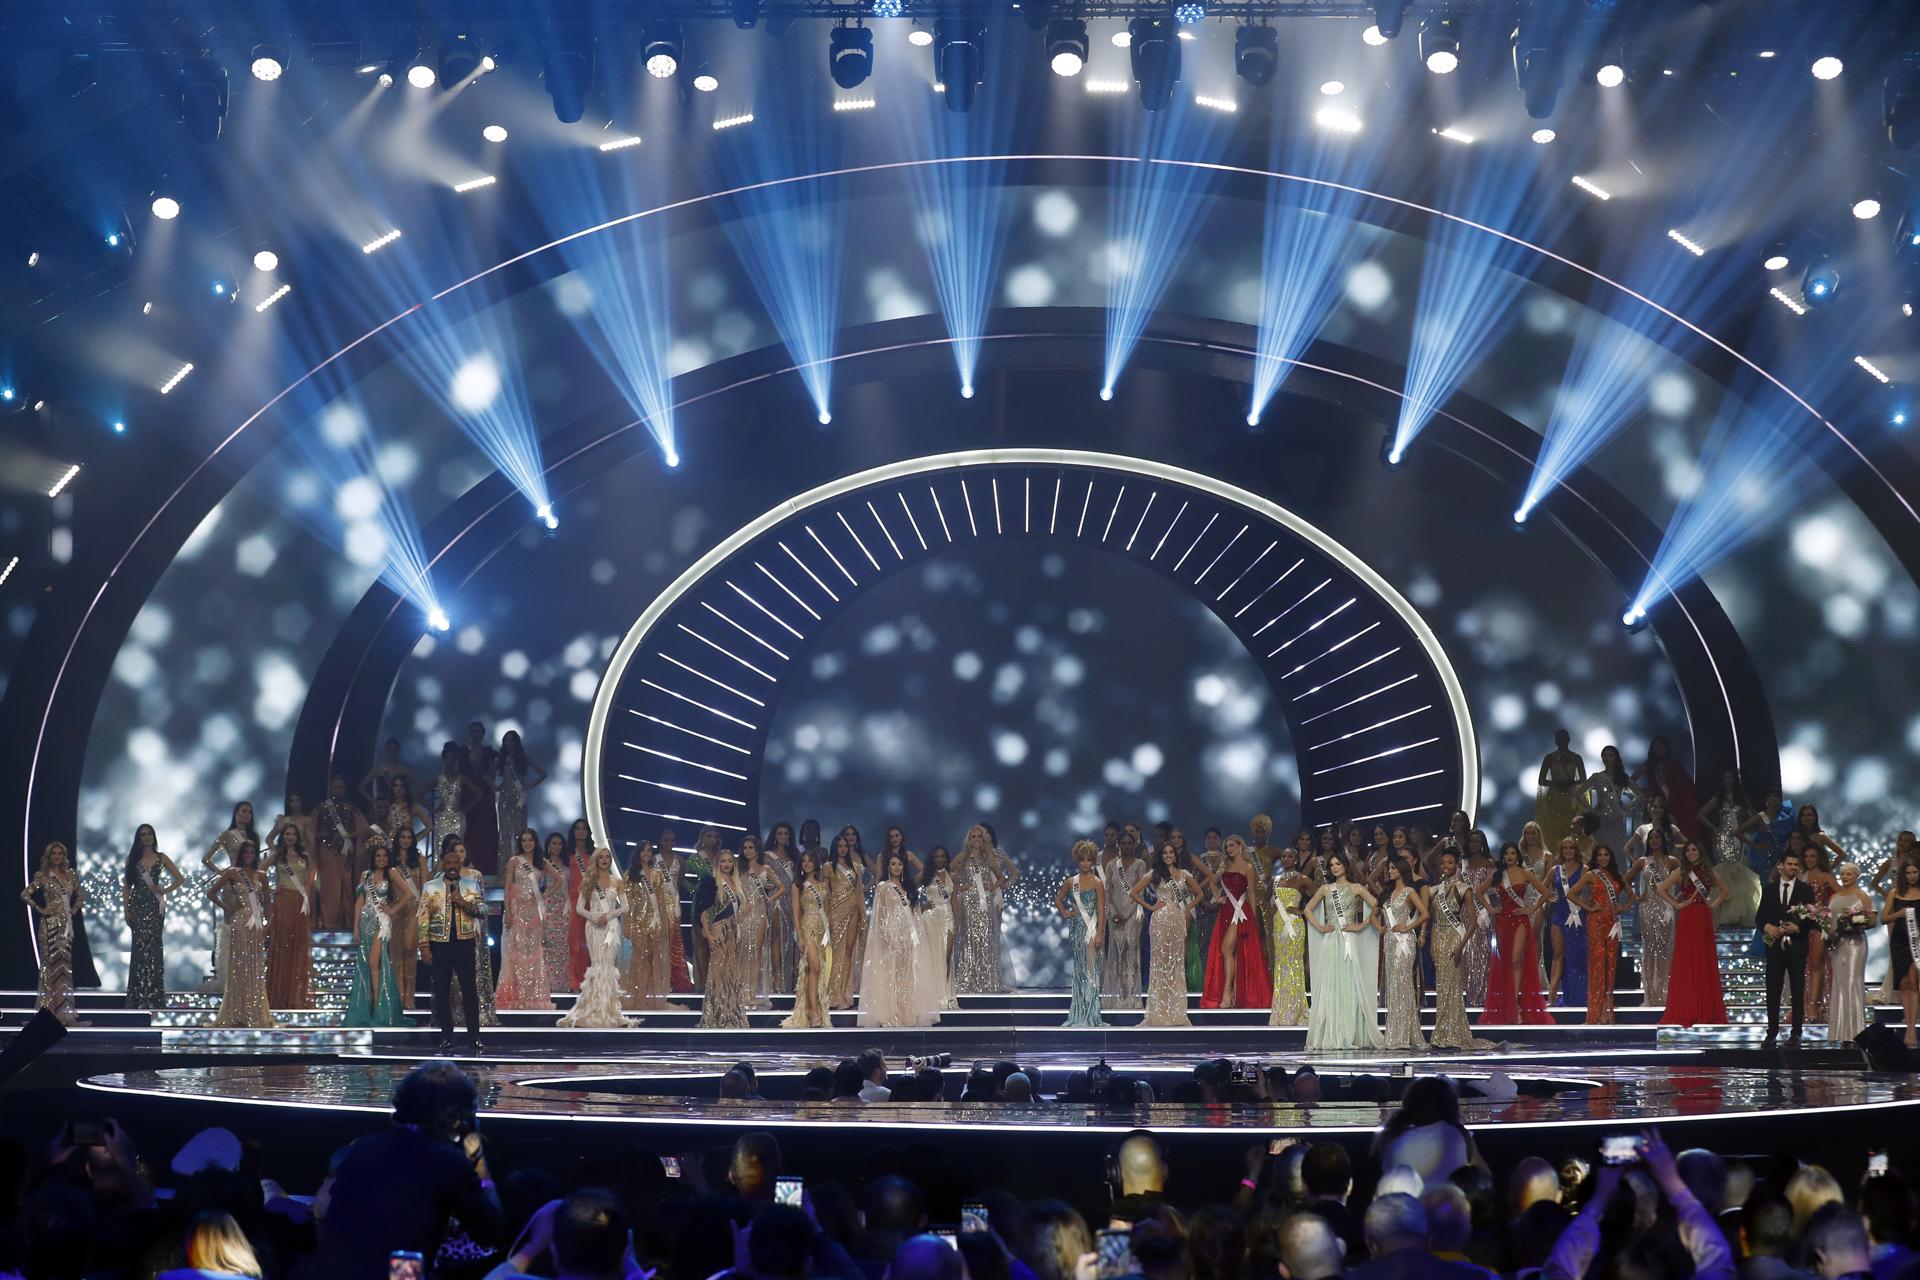 A file picture showing contestants on stage during the Miss Universe 2021 contest in Eilat, Israel. EFE/EPA/FILE/ATEF SAFADI